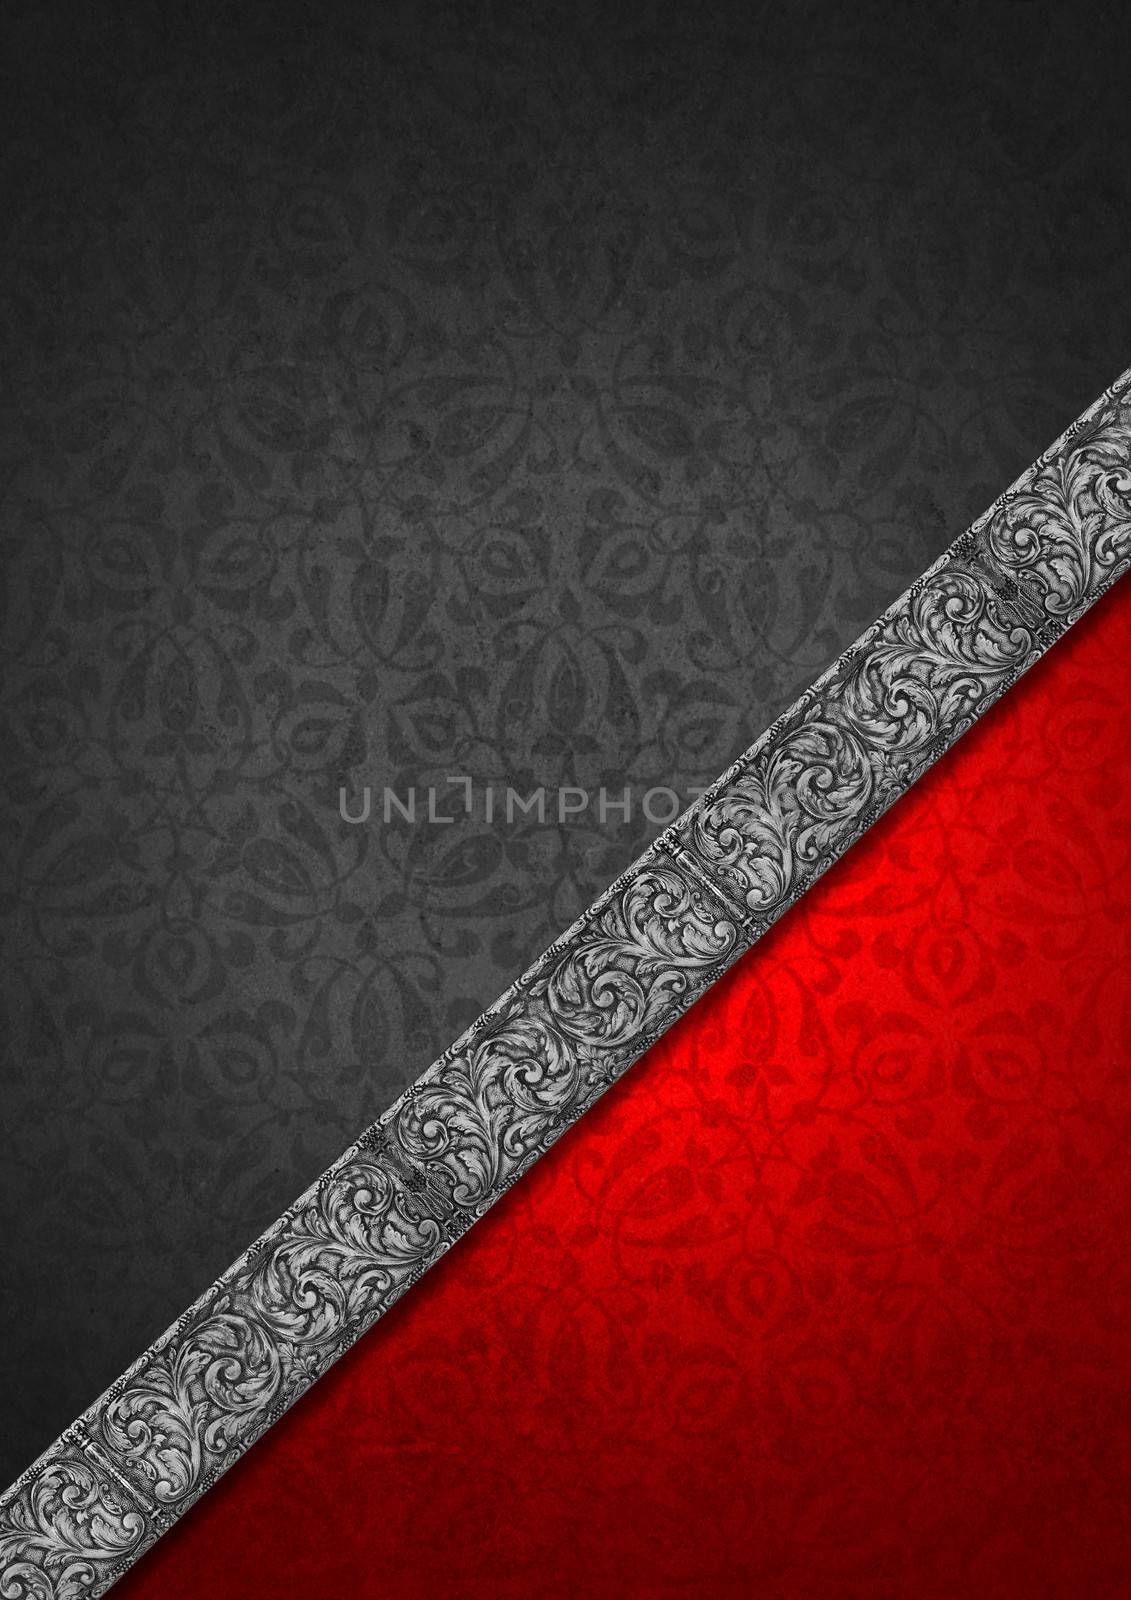 Template of gray and red velvet and texture with ornate floral seamless and diagonal silver floral band

